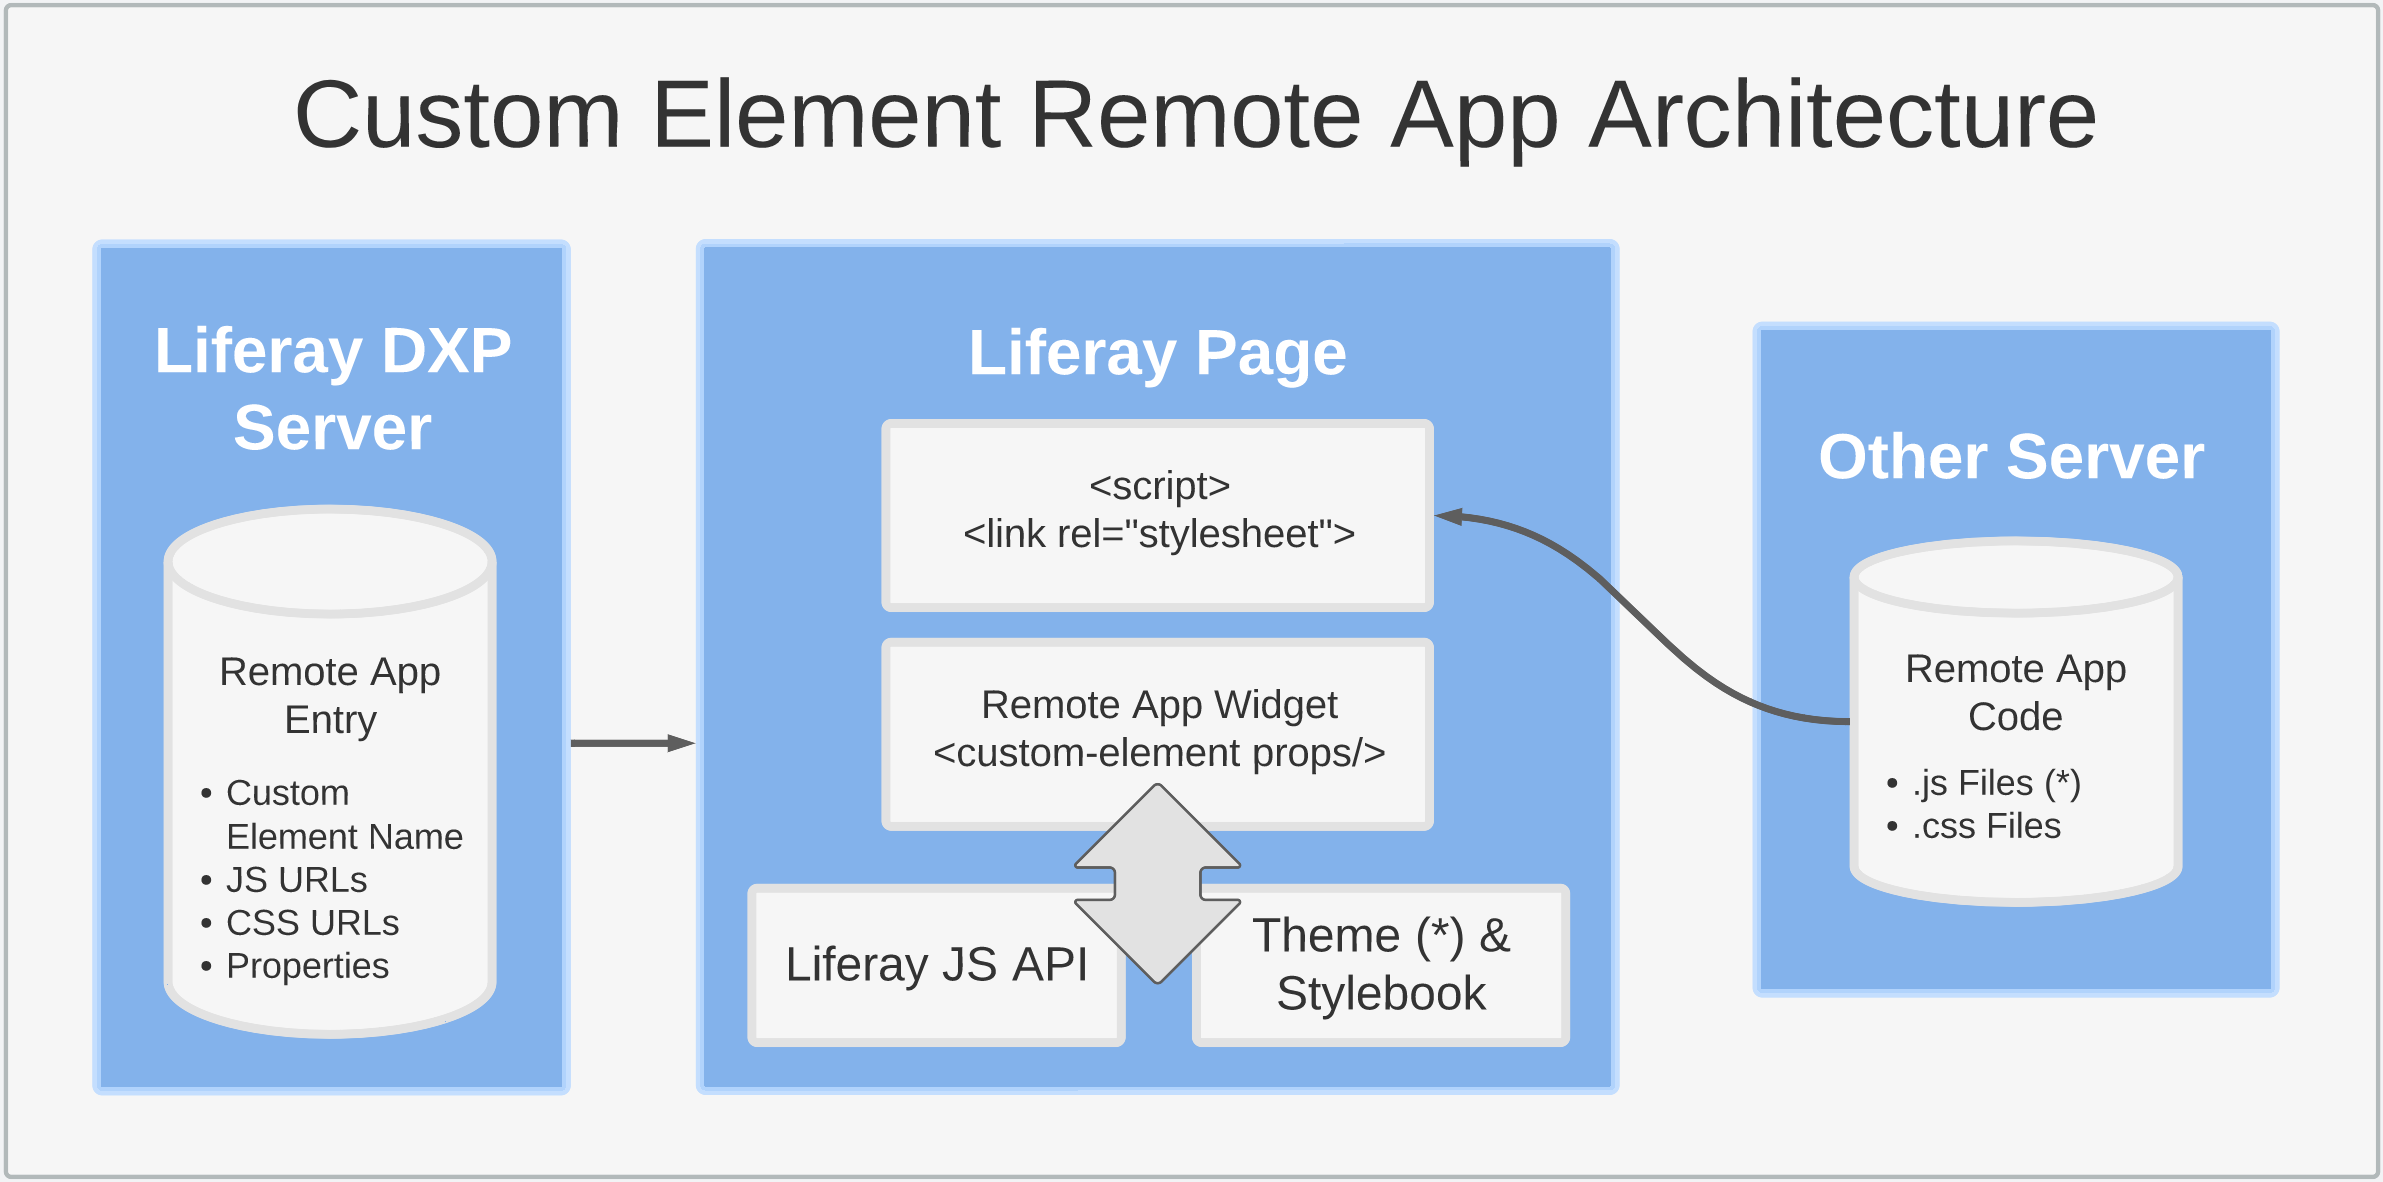 The custom element architecture includes an entry in the Liferay server, application code stored on a server, and the Liferay page with the client extension's unique widget.